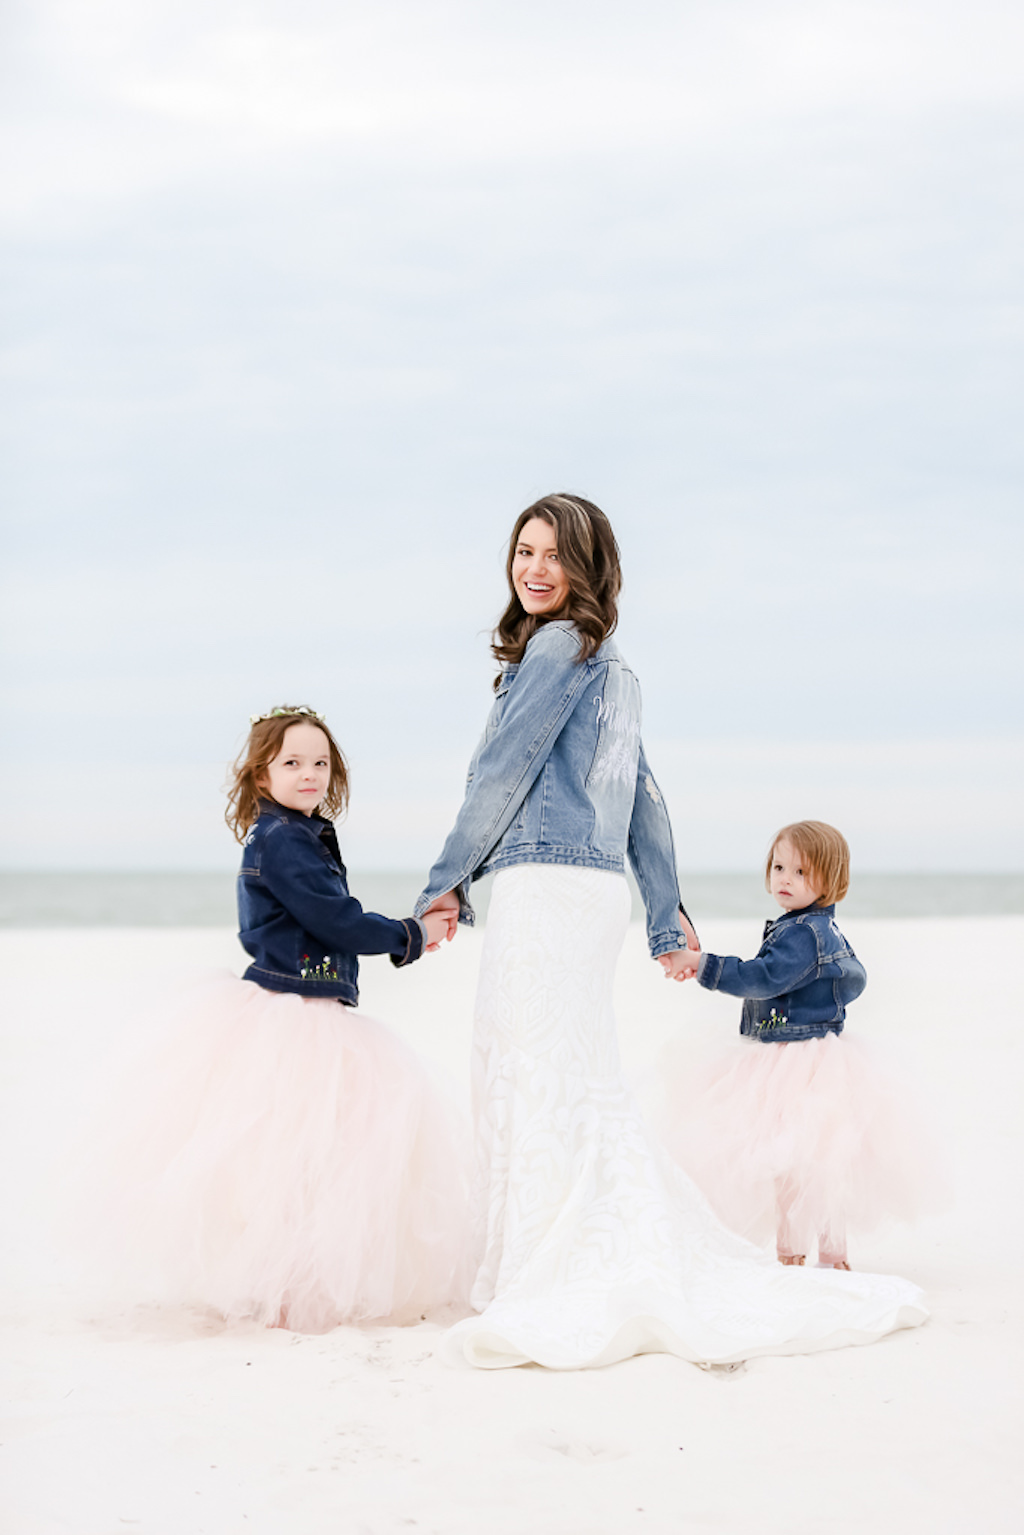 Clearwater Beach Bride and Flower Girls Wedding Portrait, in Custom Jean Jackets with Blush Pink Tulle Skirts | Photographer Lifelong Photography Studios | Hair and Makeup Michele Renee The Studio